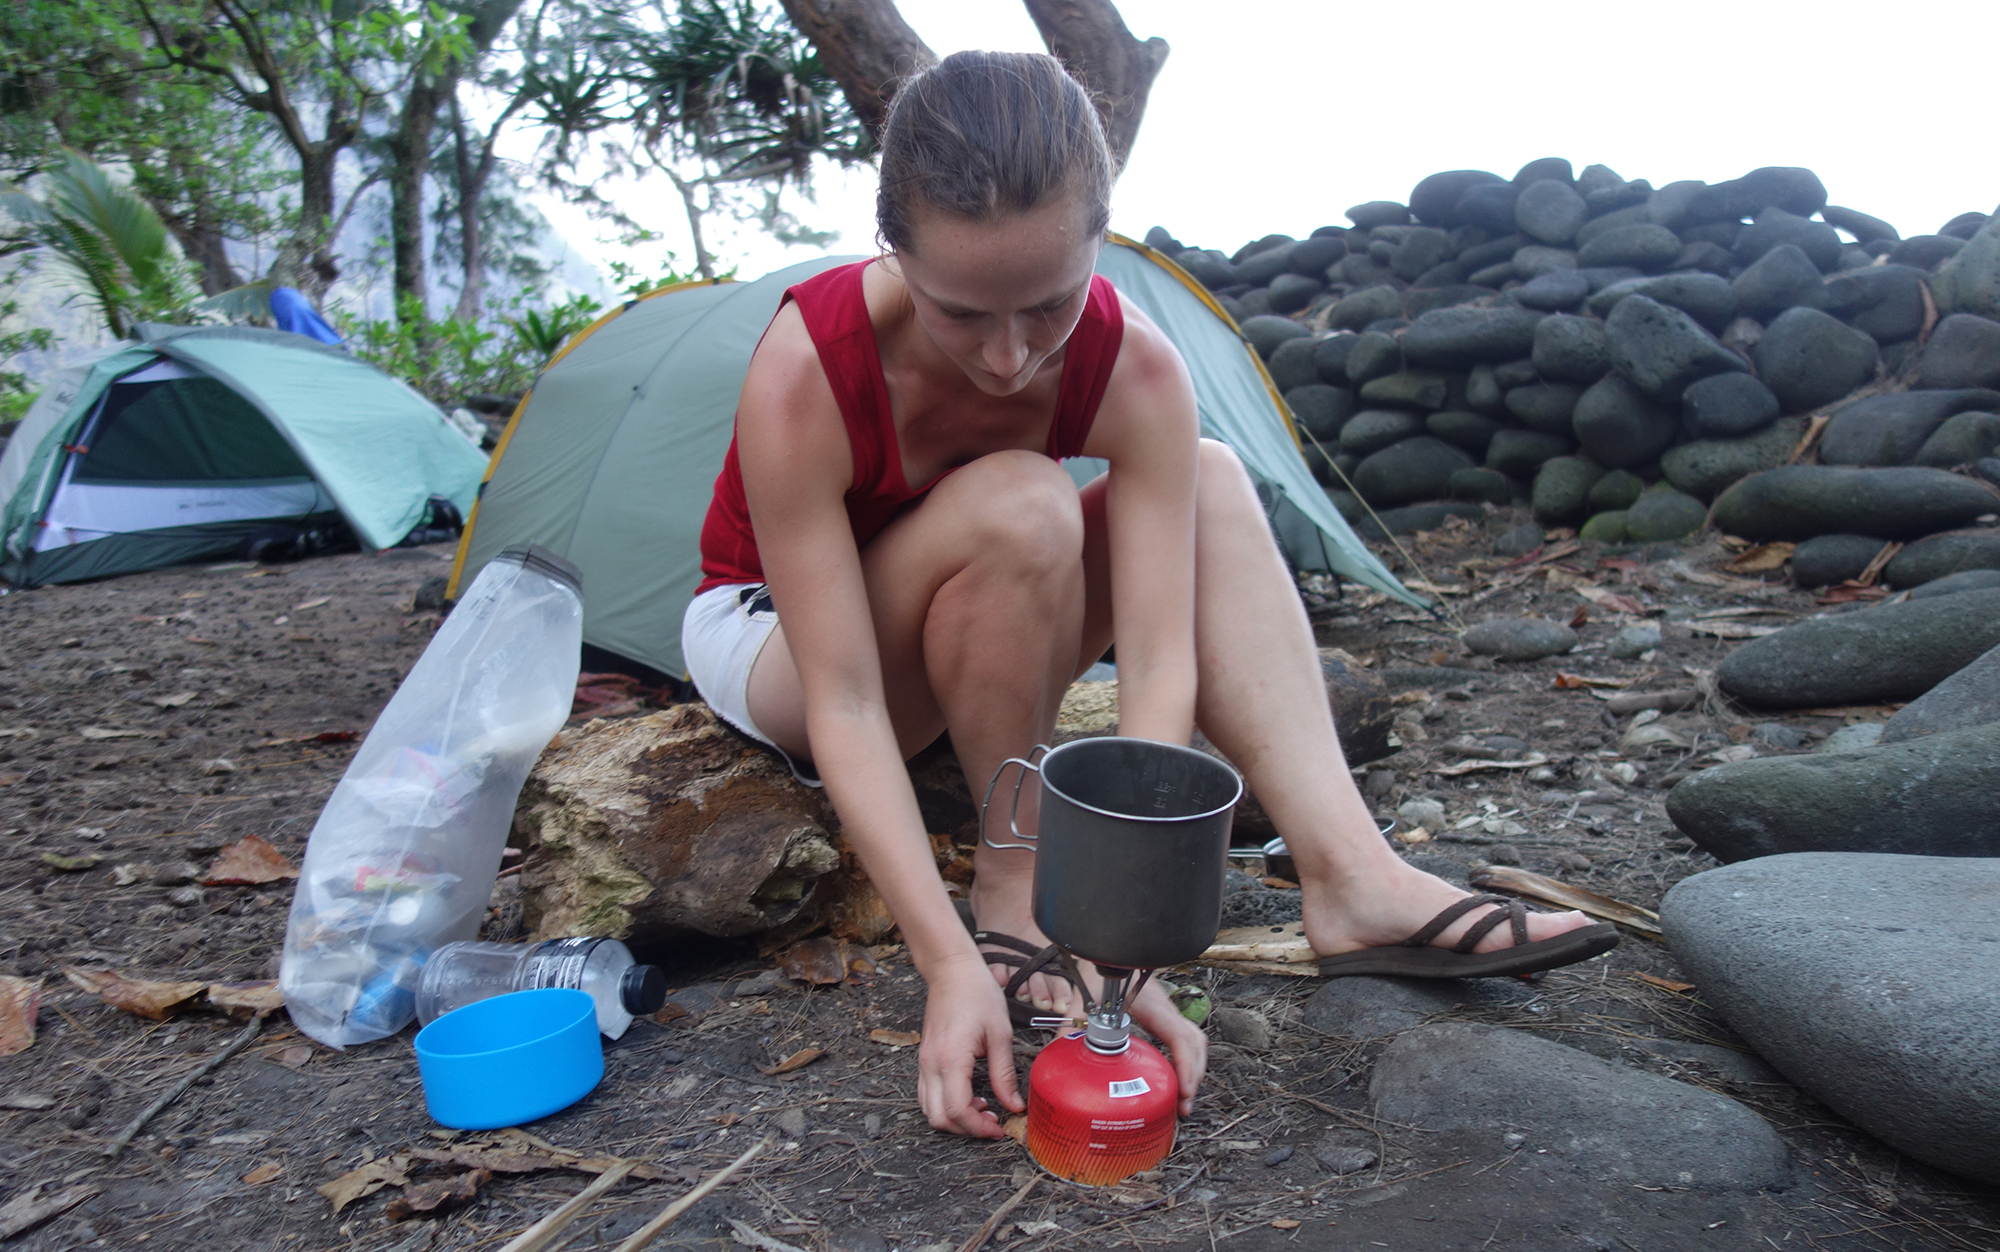 Getting ready to cook some dinner while backpacking in Waimanu Valley on the Big Island of Hawaii.